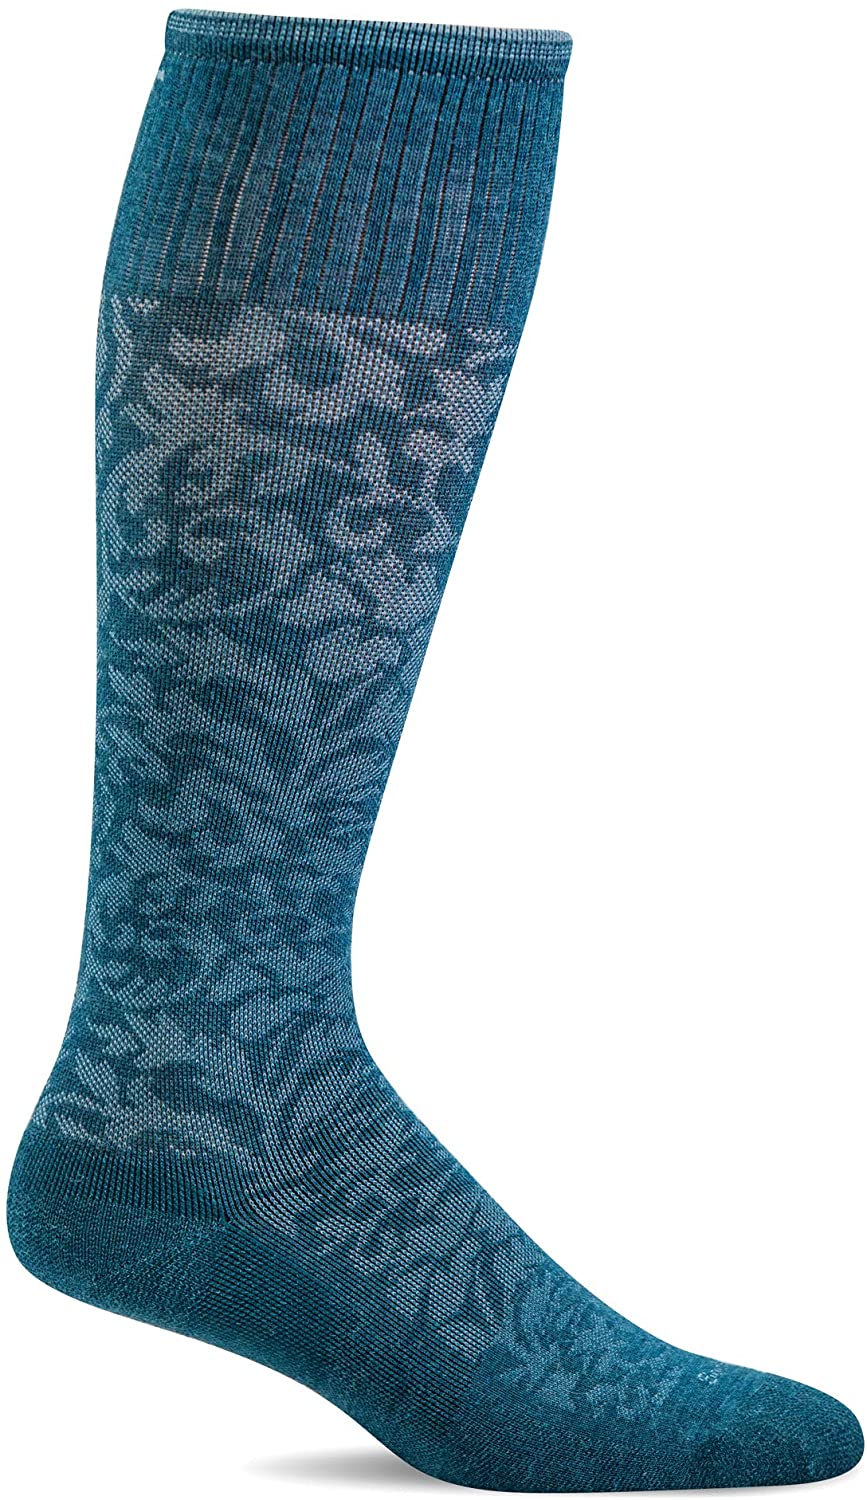 Sockwell Women's Damask Moderate Graduated Compression Sock in Teal Blue from the side